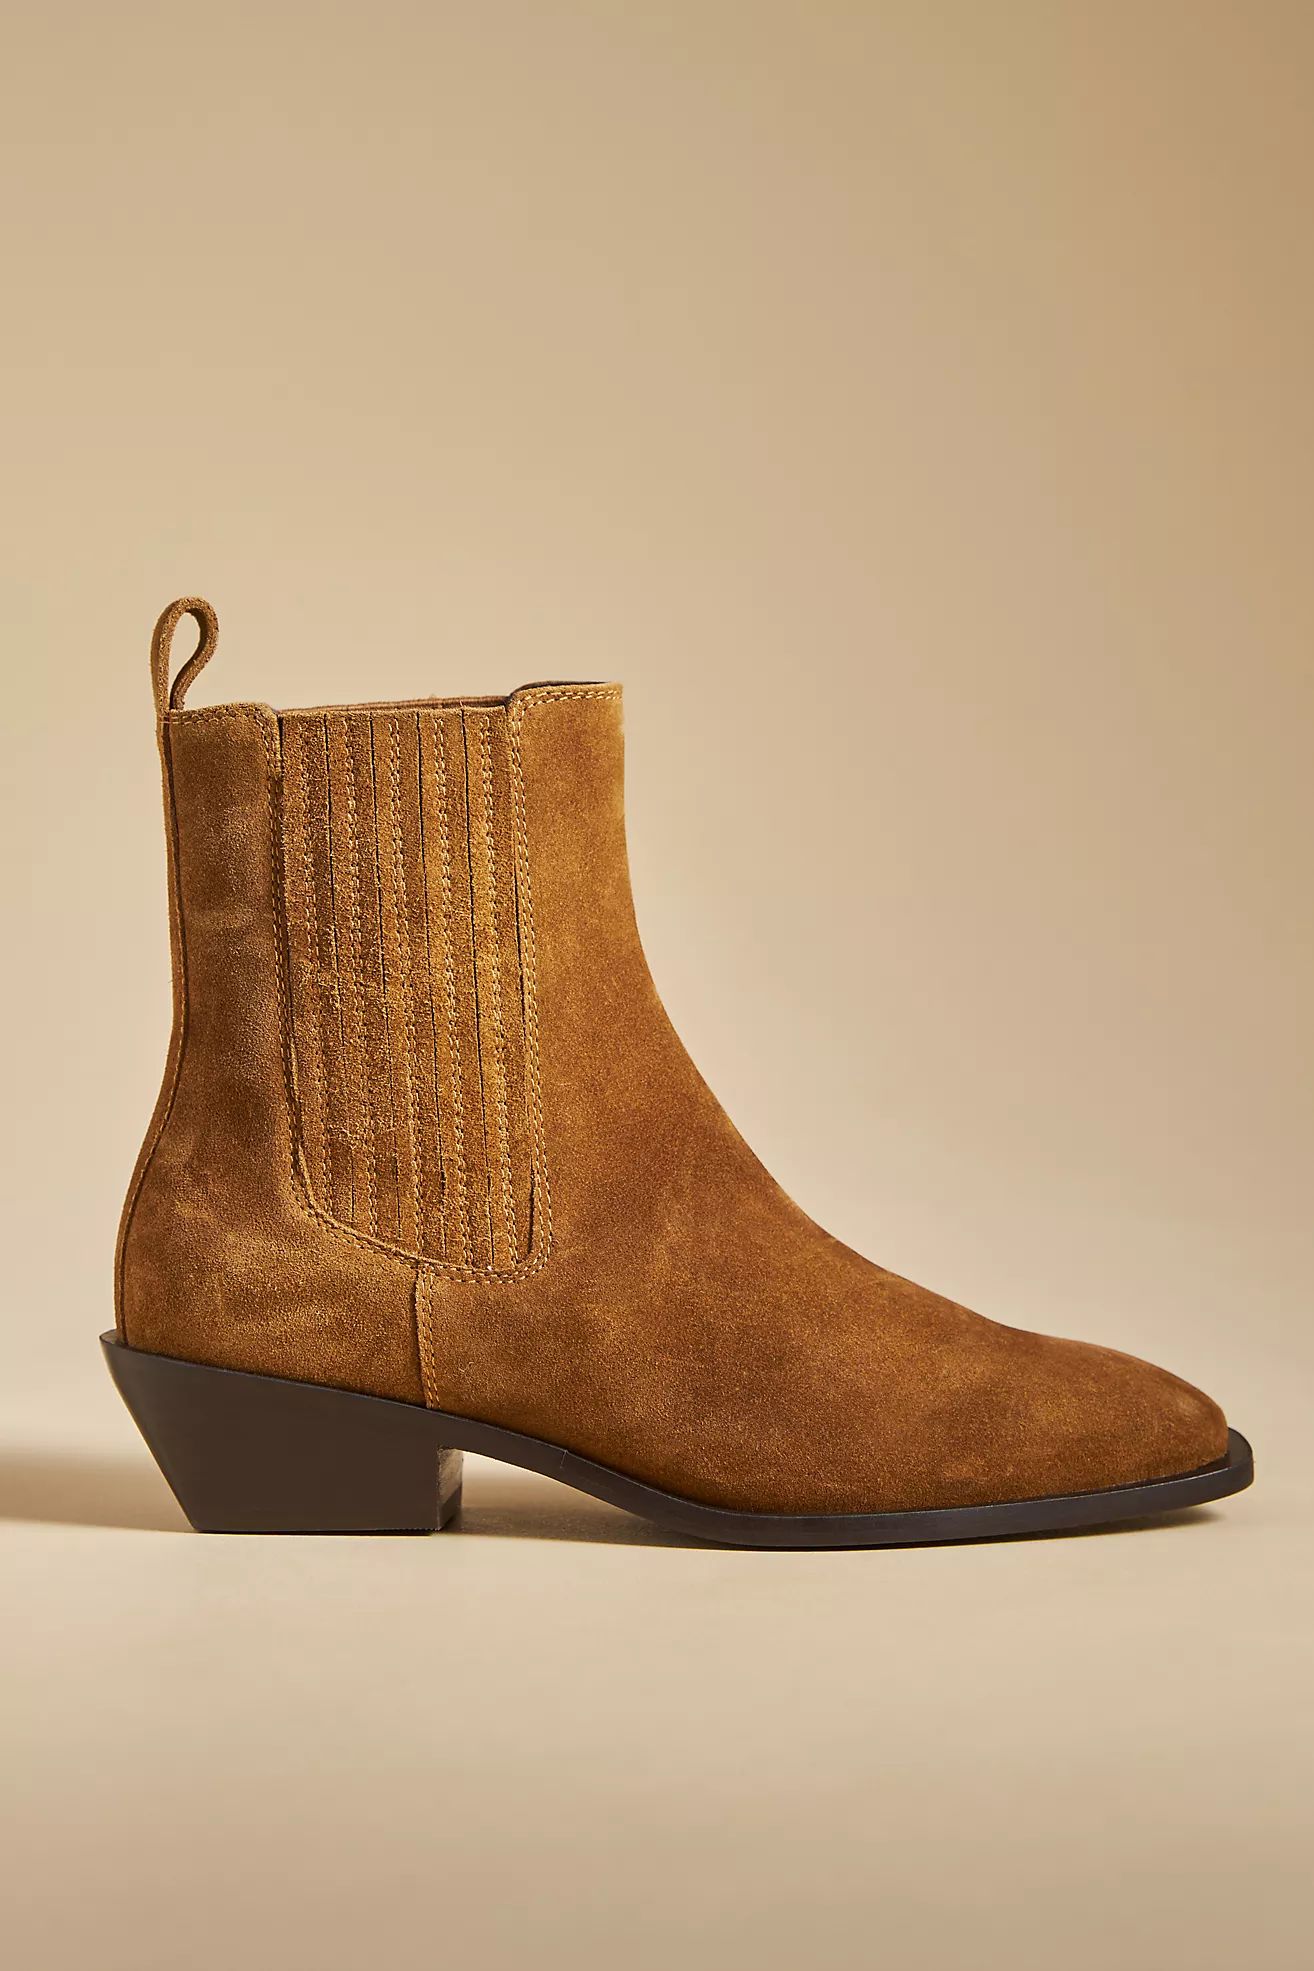 Seychelles Hold Me Down Boots | Anthropologie (US)